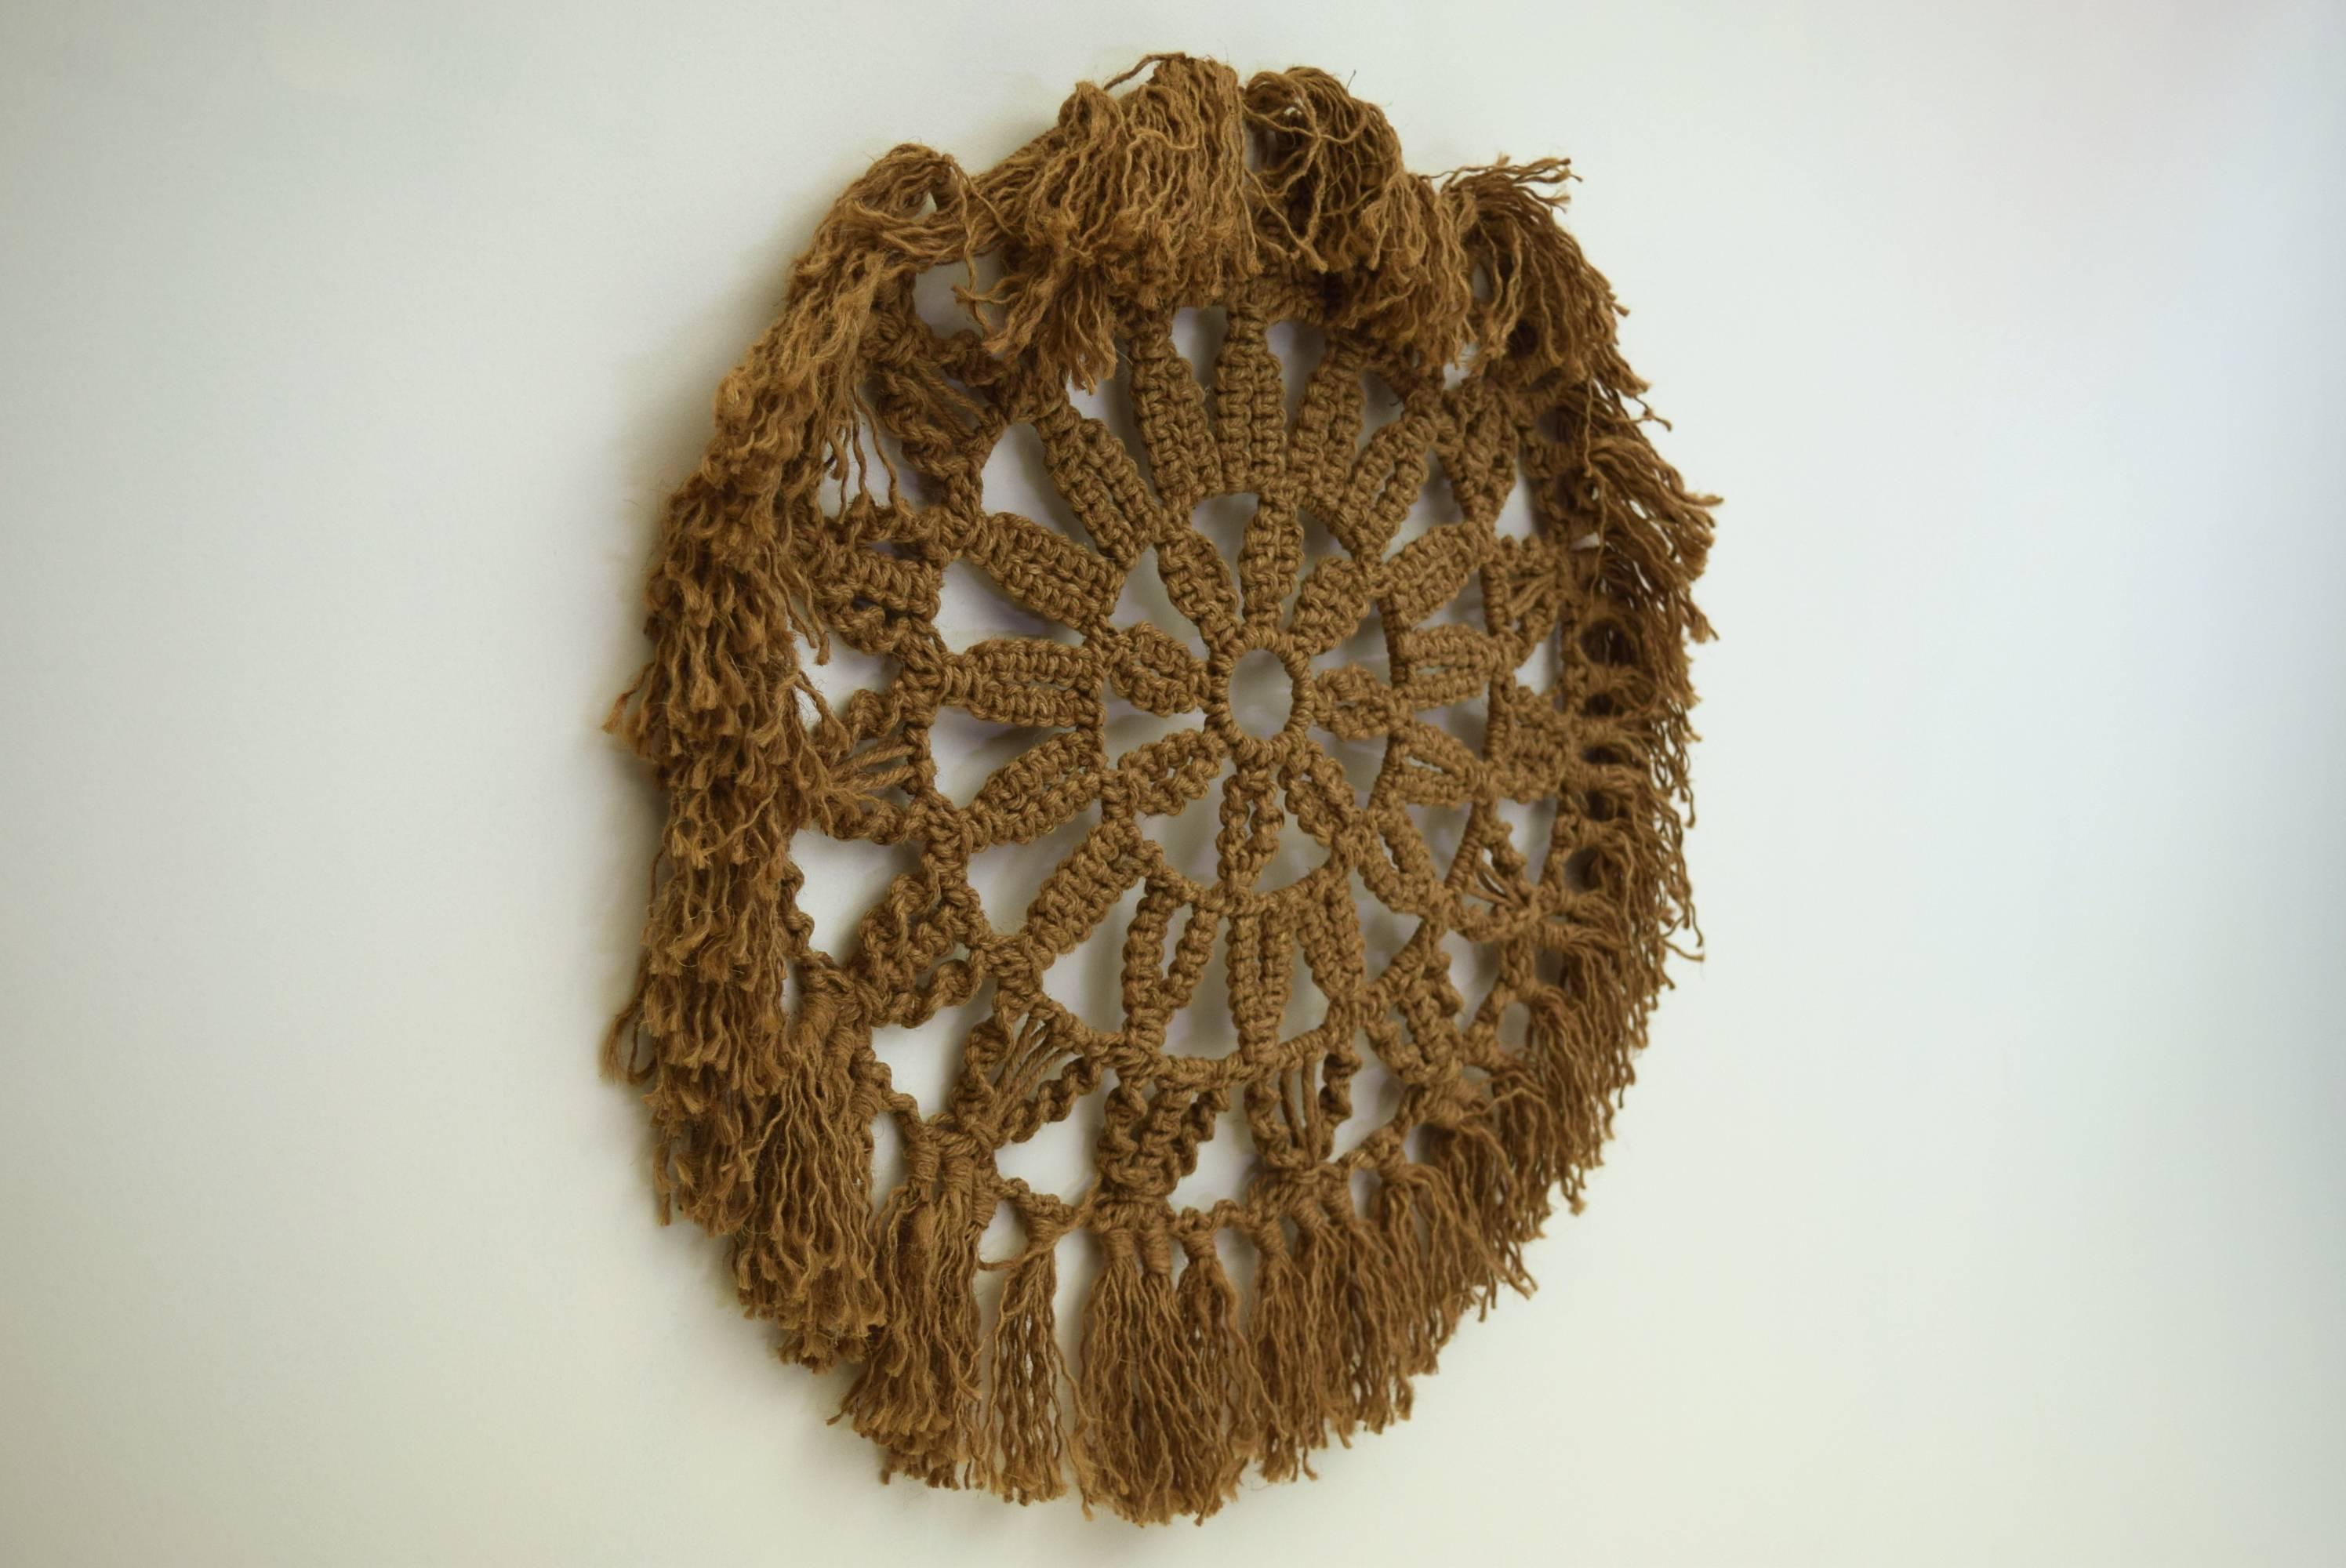 Popular 1970s item, these wall hanging were produced in various sizes with this model being about as large as they got at 3 feet in diameter.

Produced using rings of steel that are then hand woven over, these mid century modern textile wall art